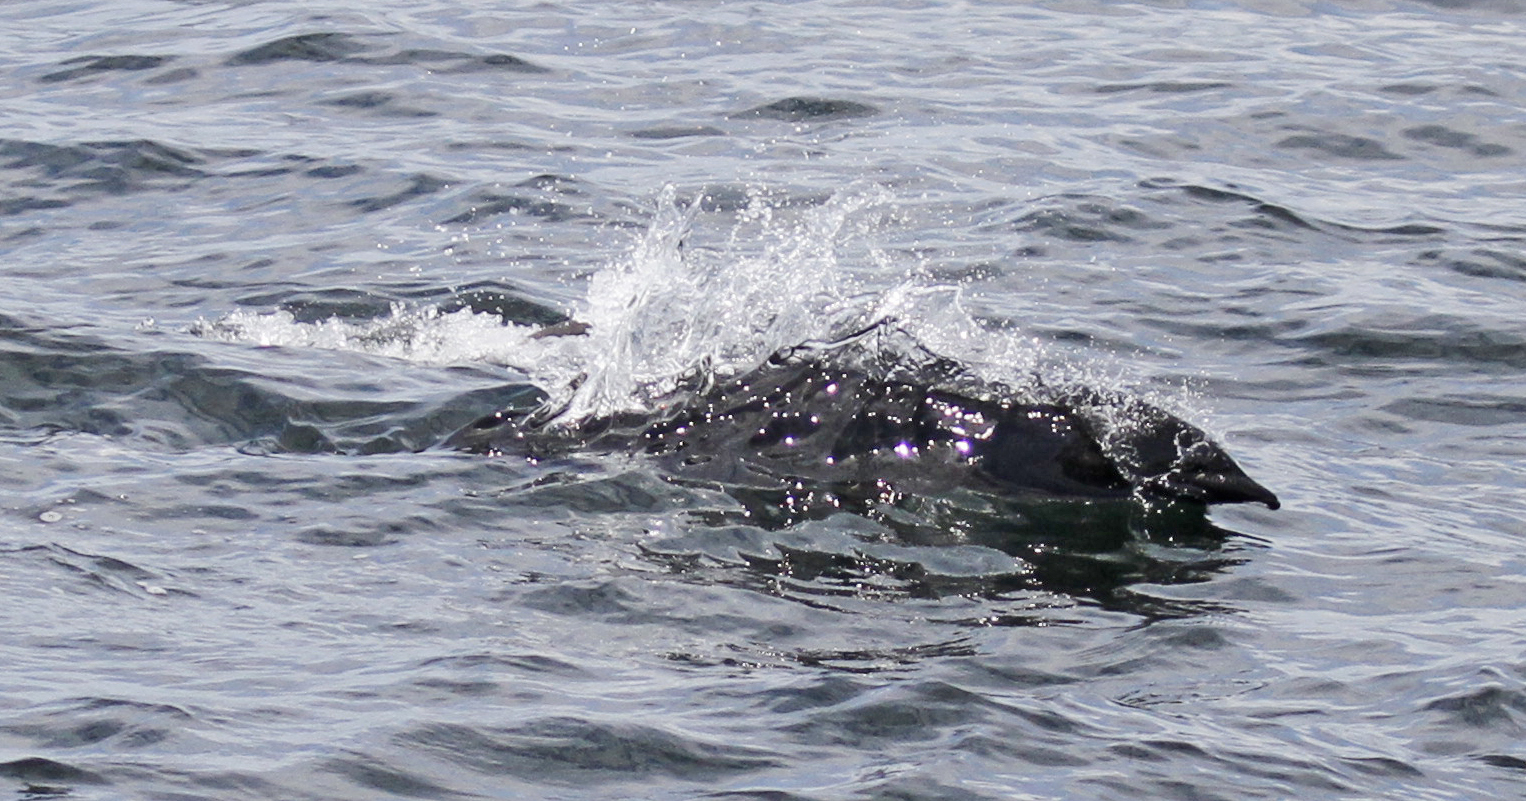 Image of Northern Right Whale Dolphin